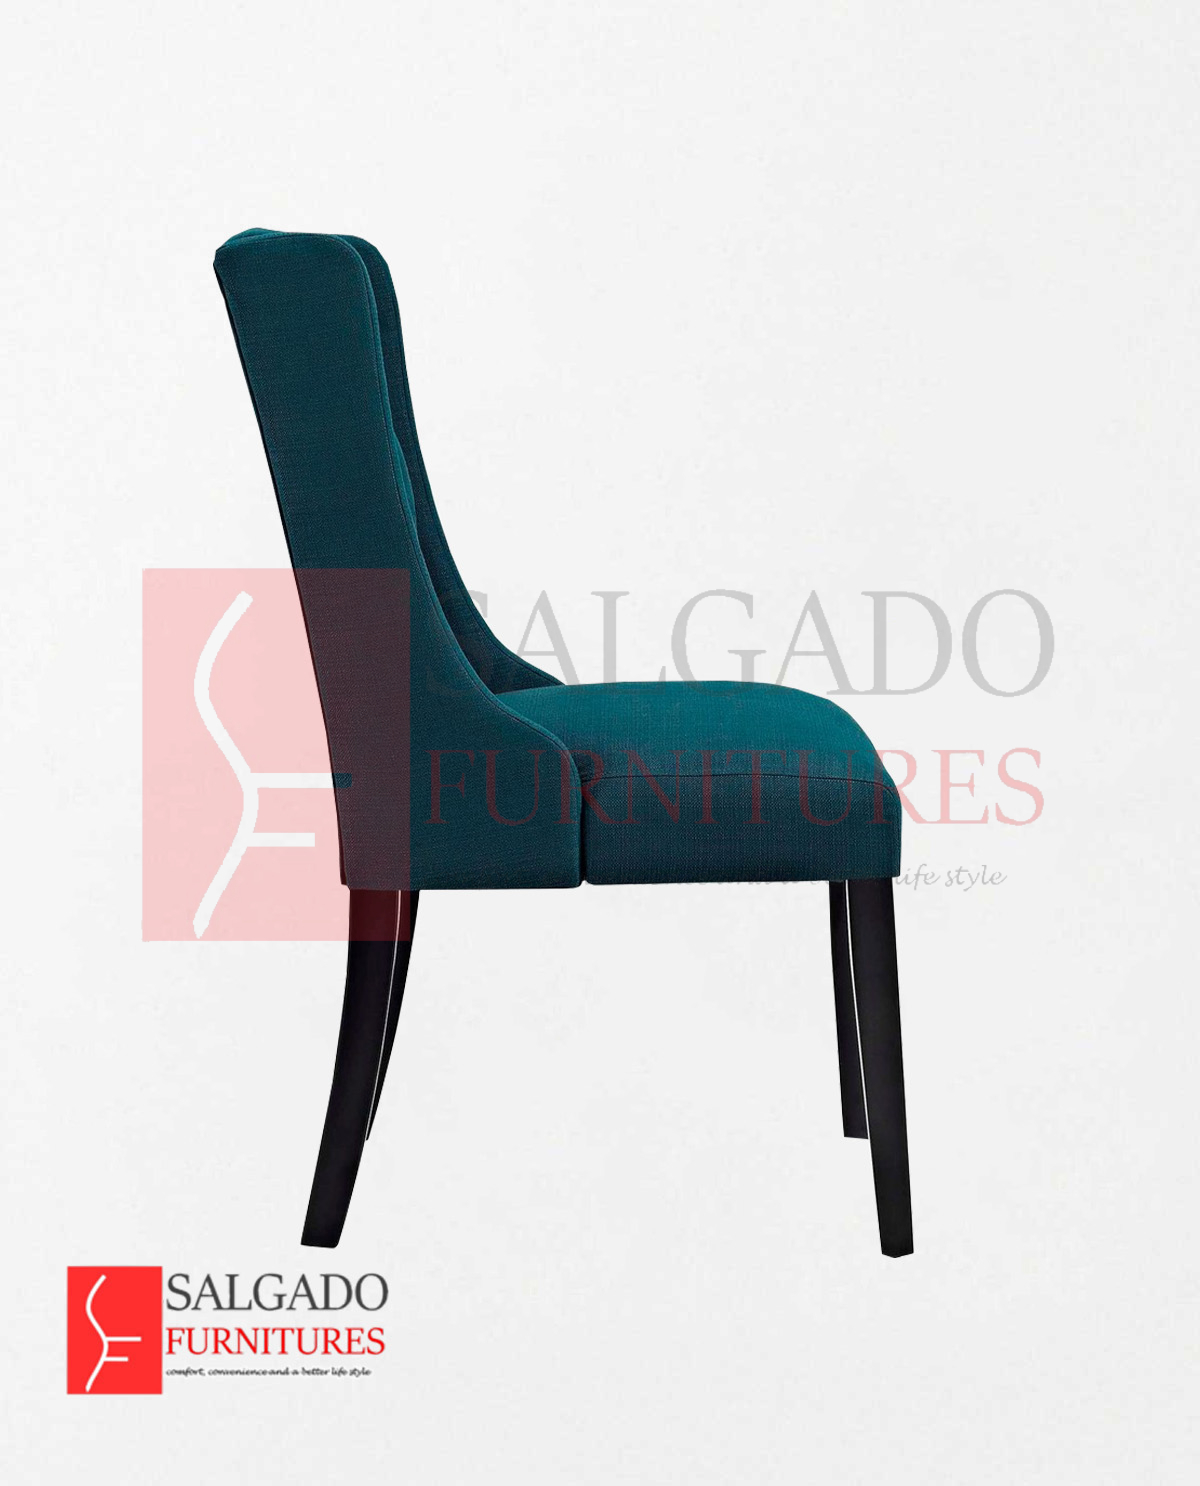 mahogany-high-quality-furniture-collection